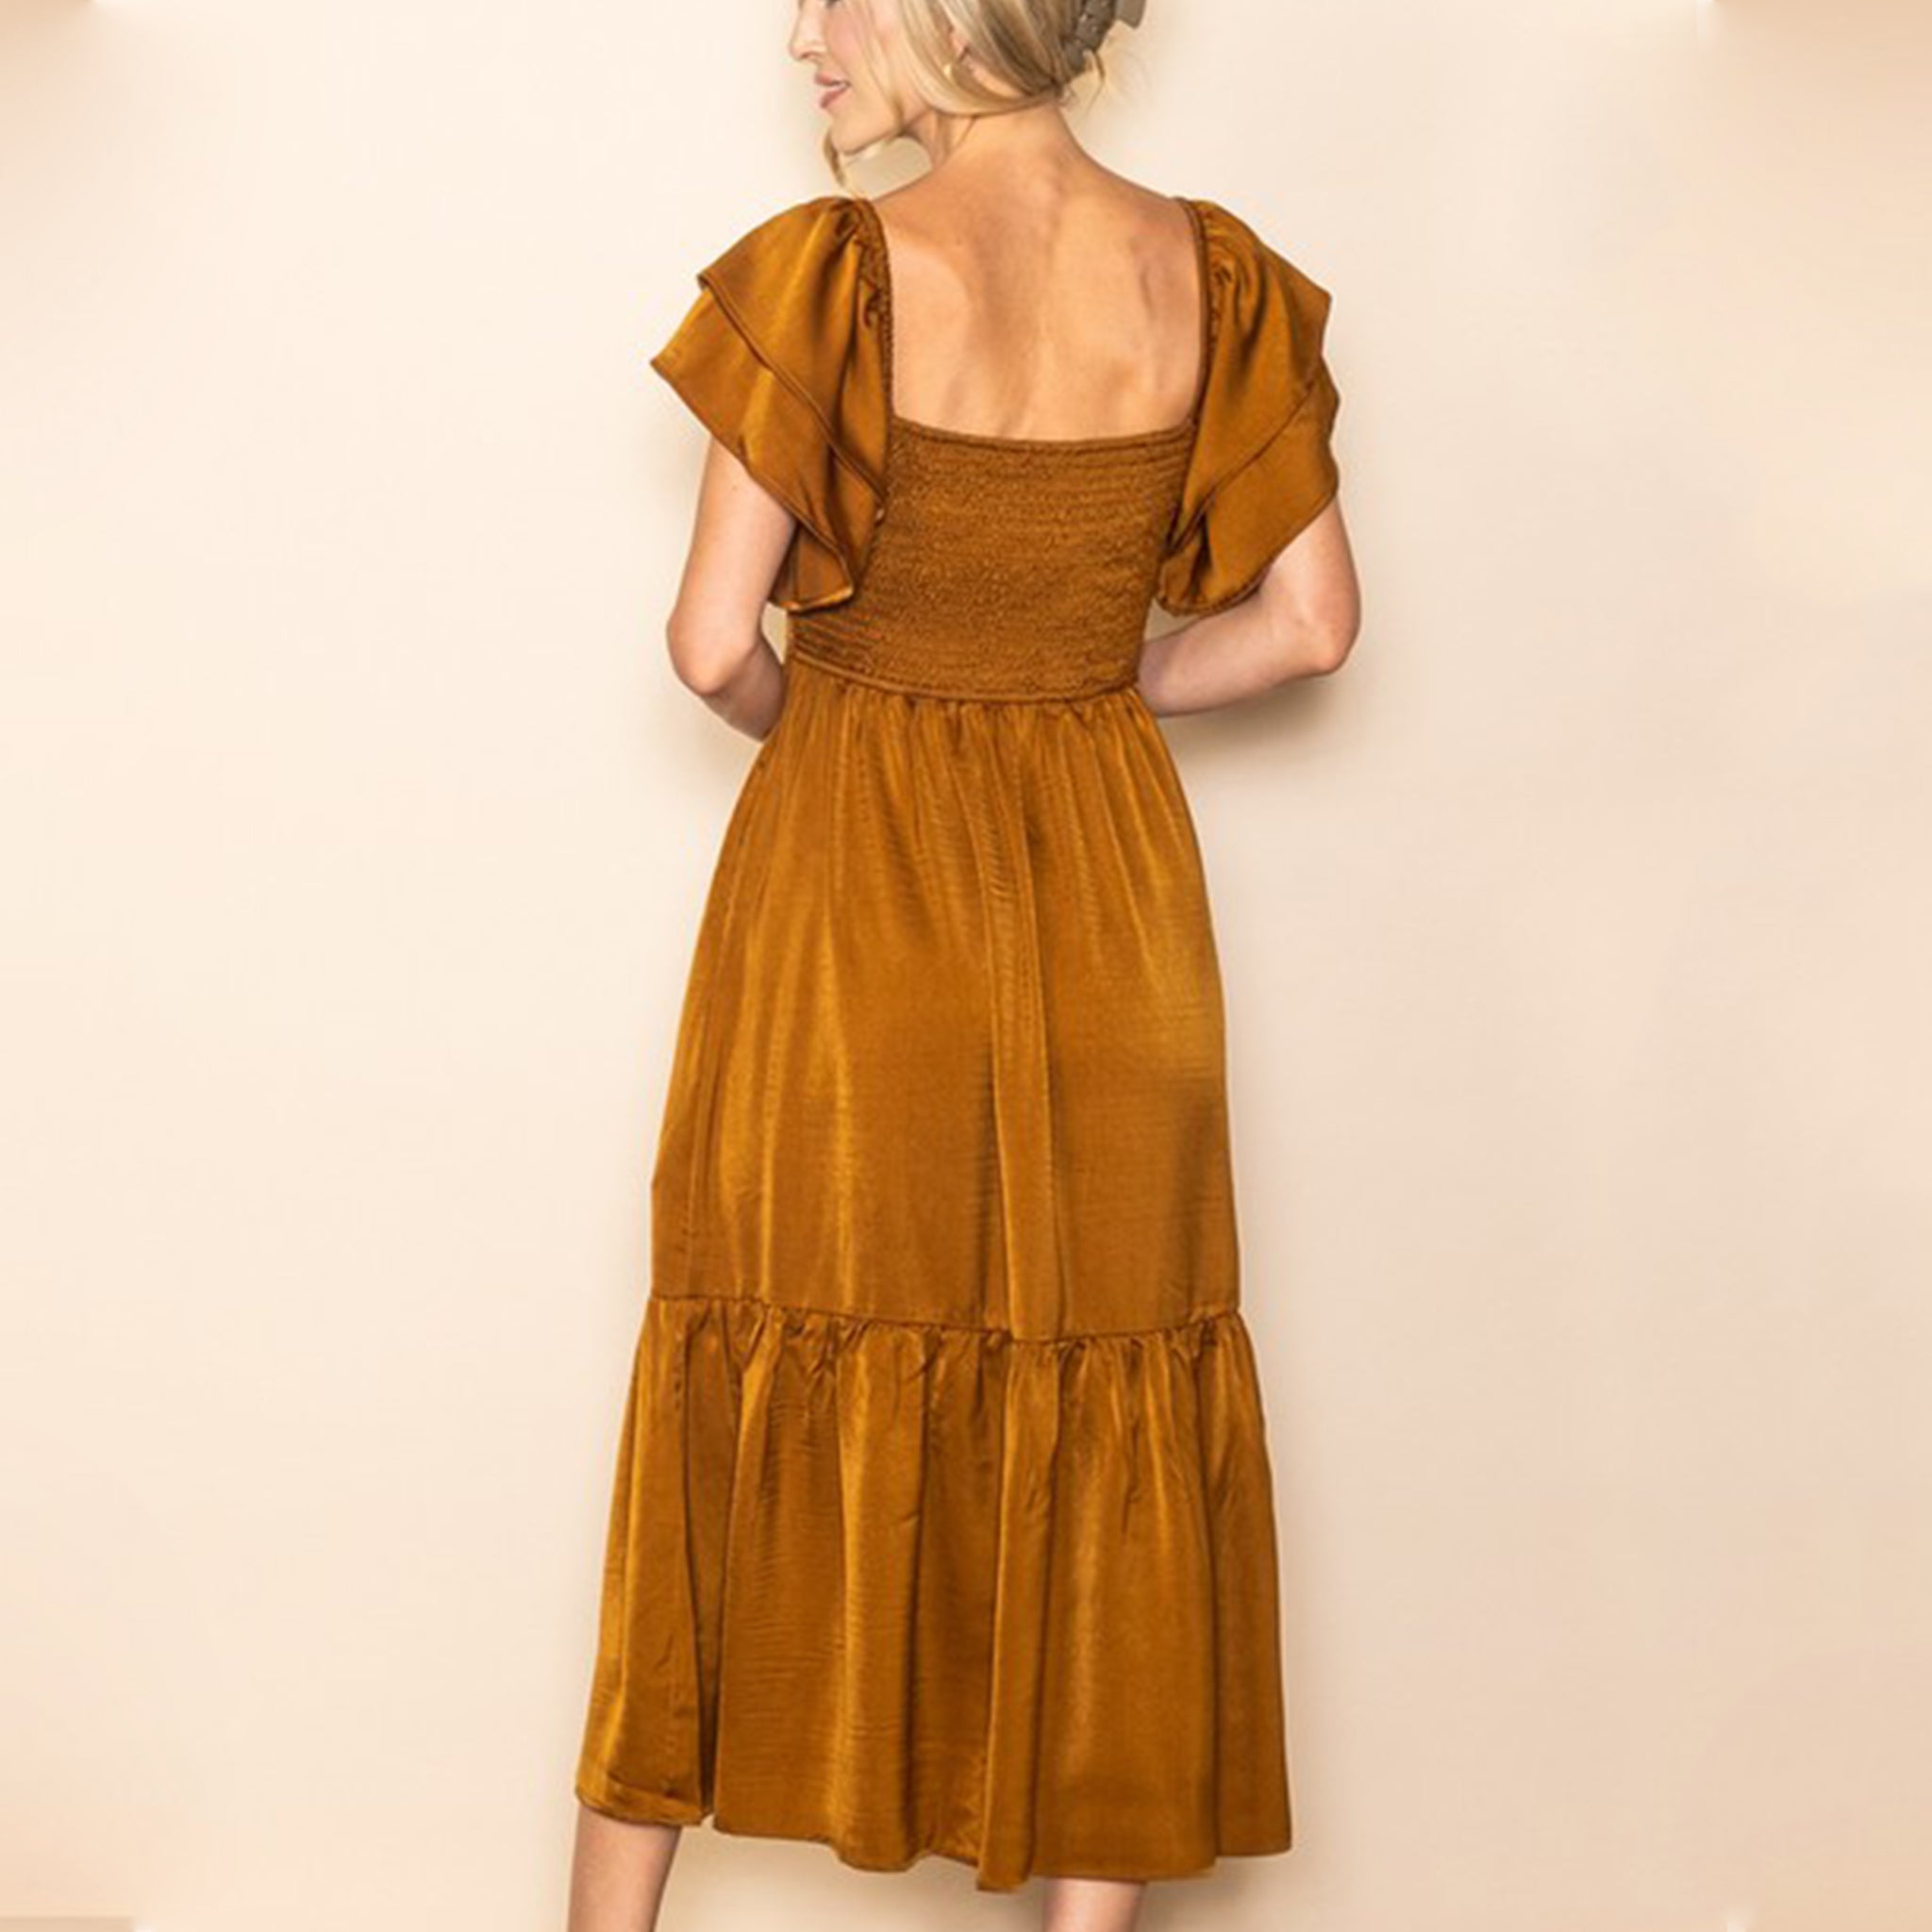 A copper satin dress with a smocked bodice, flutter sleeves and a tiered skirt bottom.